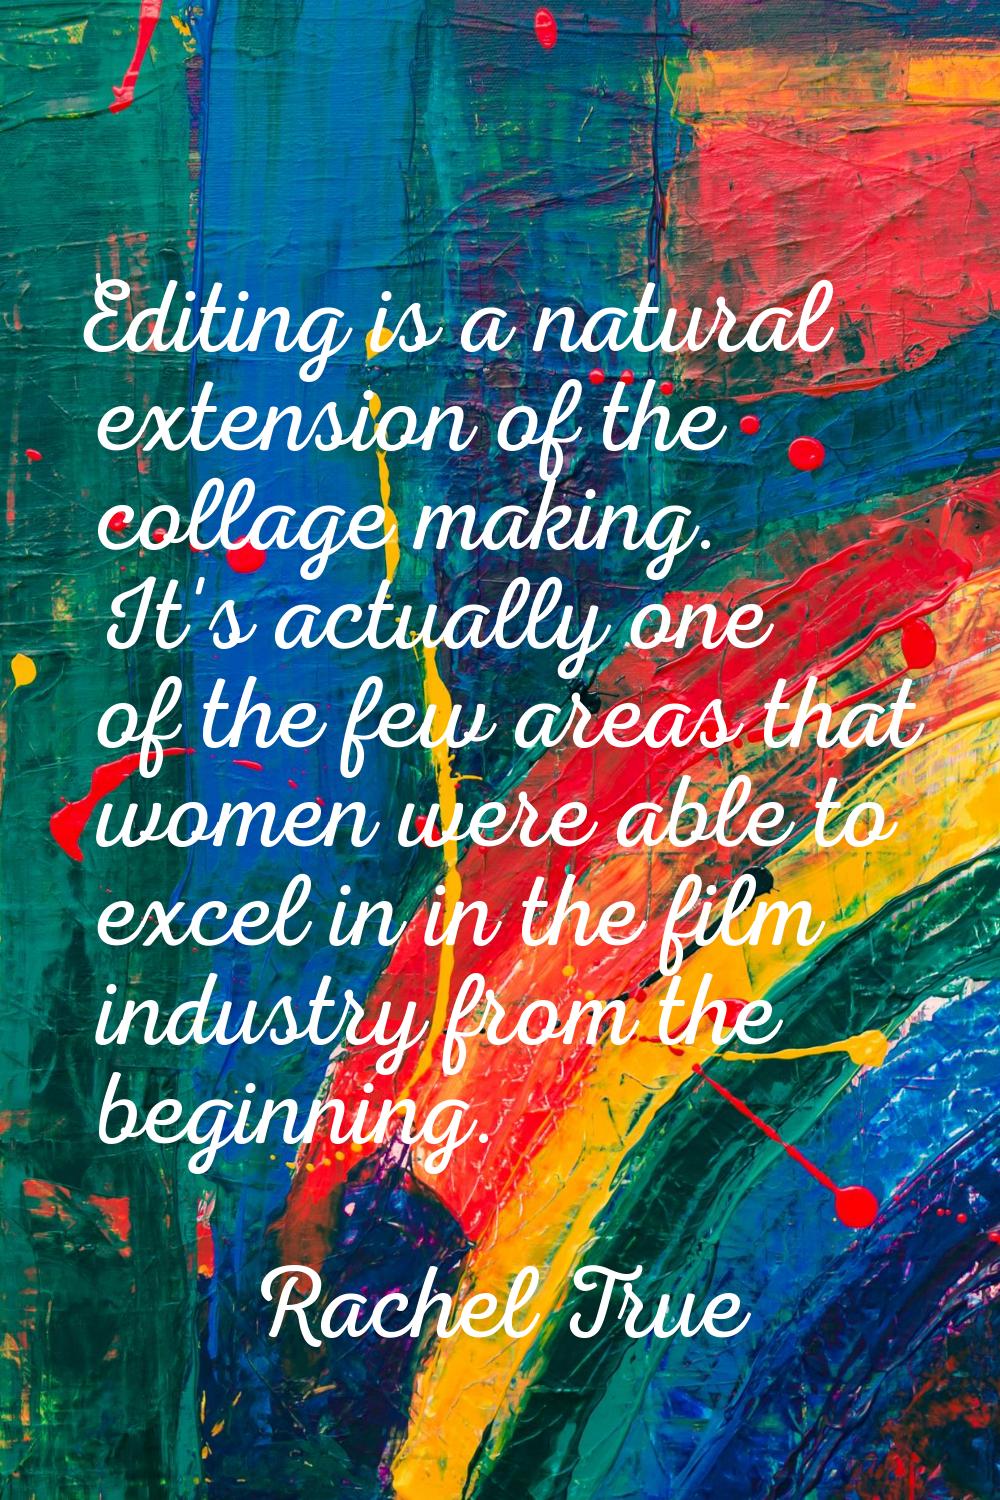 Editing is a natural extension of the collage making. It's actually one of the few areas that women